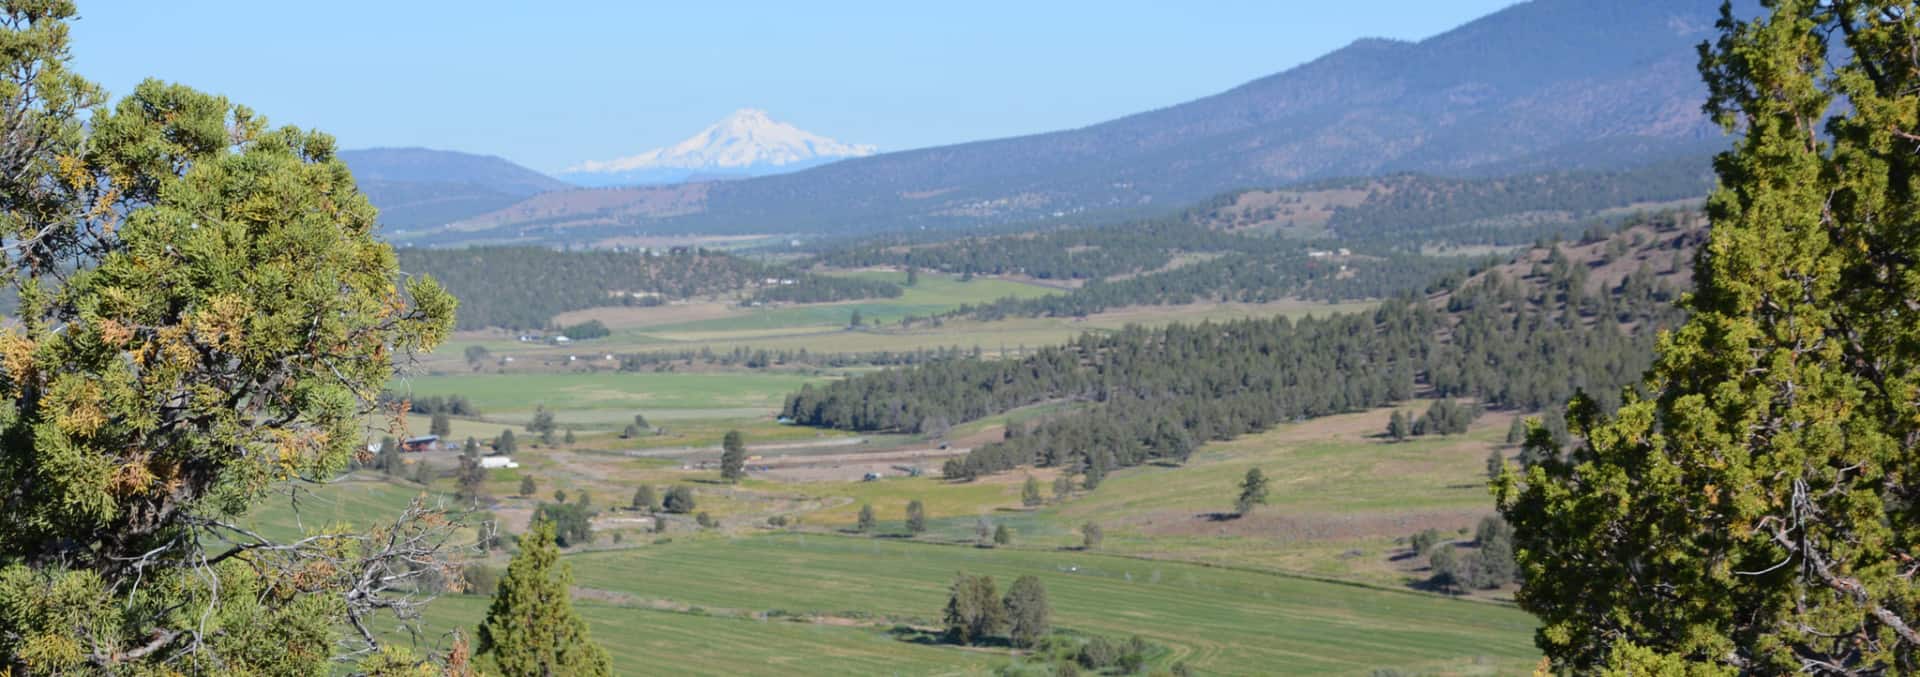 Oregon Ranch For Sale Dry Creek Hunting Reserve